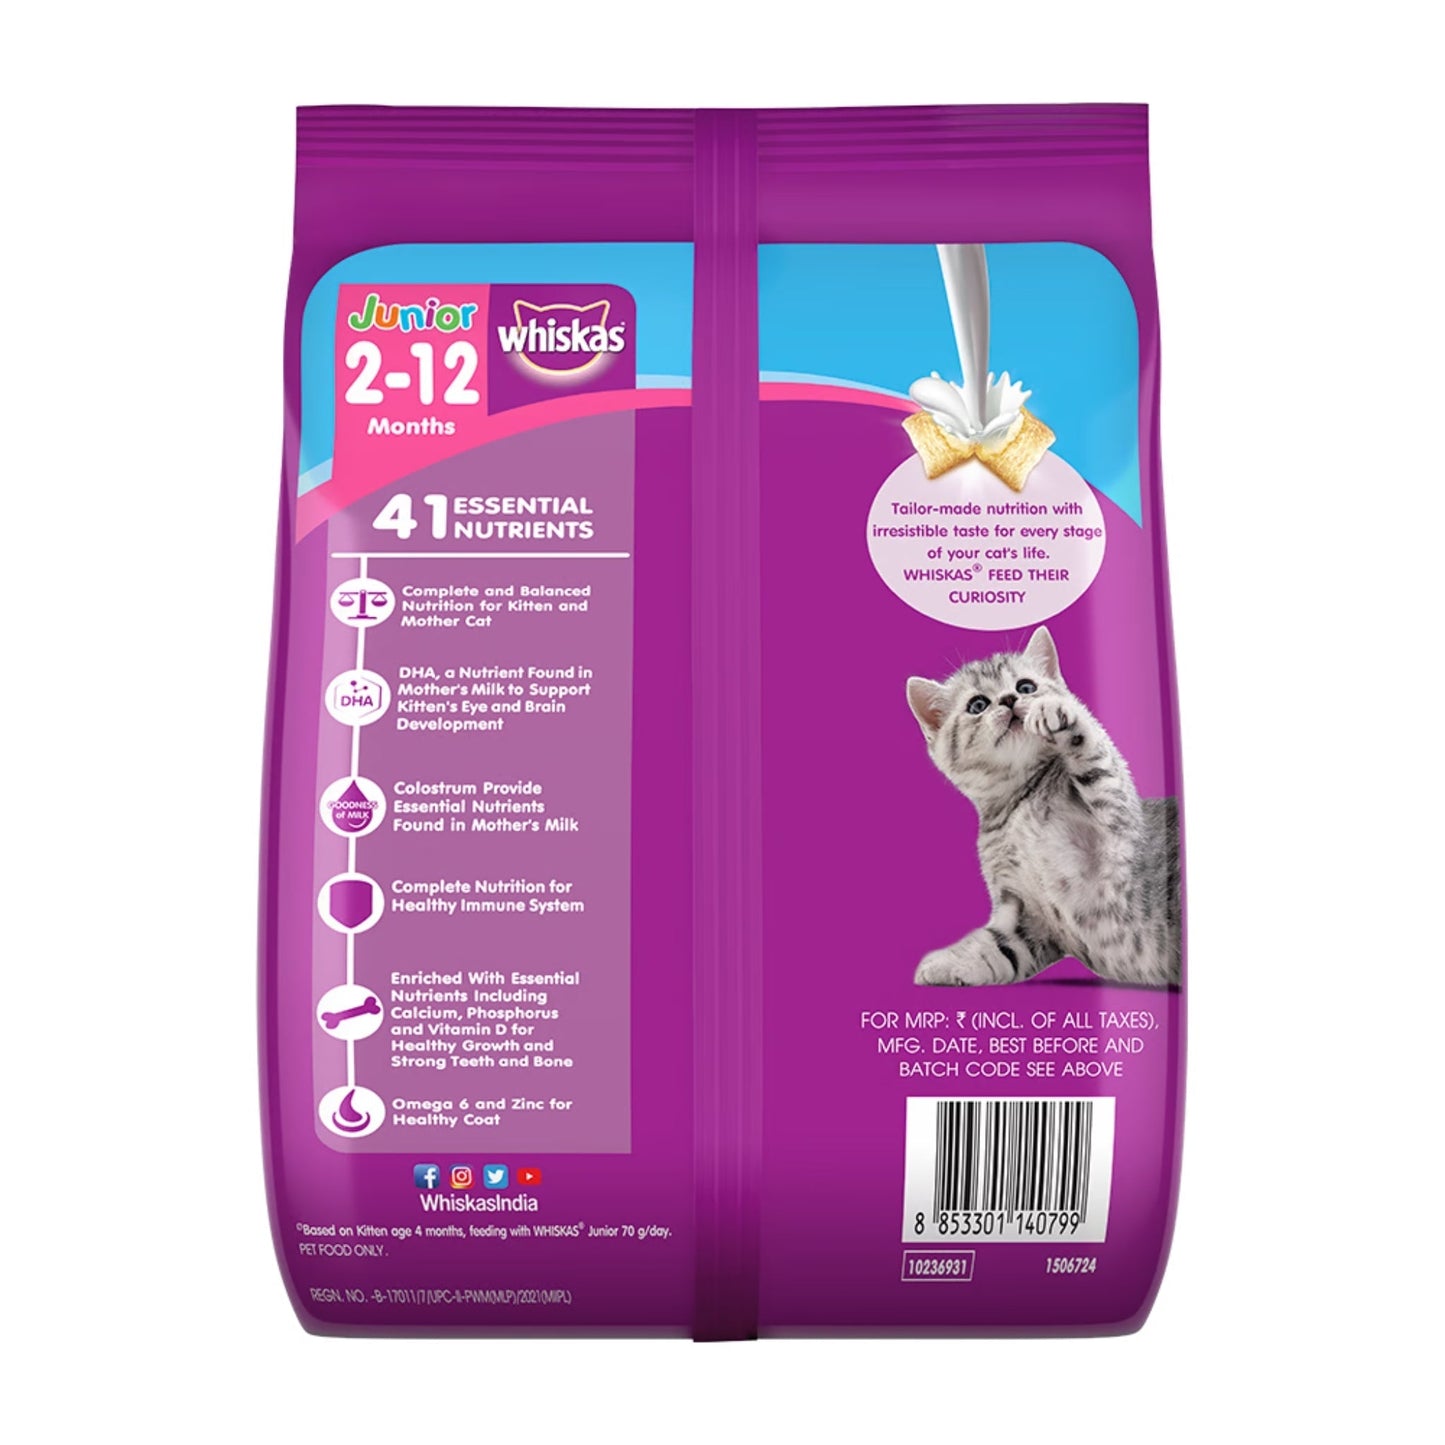 Whiskas Dry Cat Food for Mother and Baby Cat, Ocean Fish Flavor, 6.5Kg